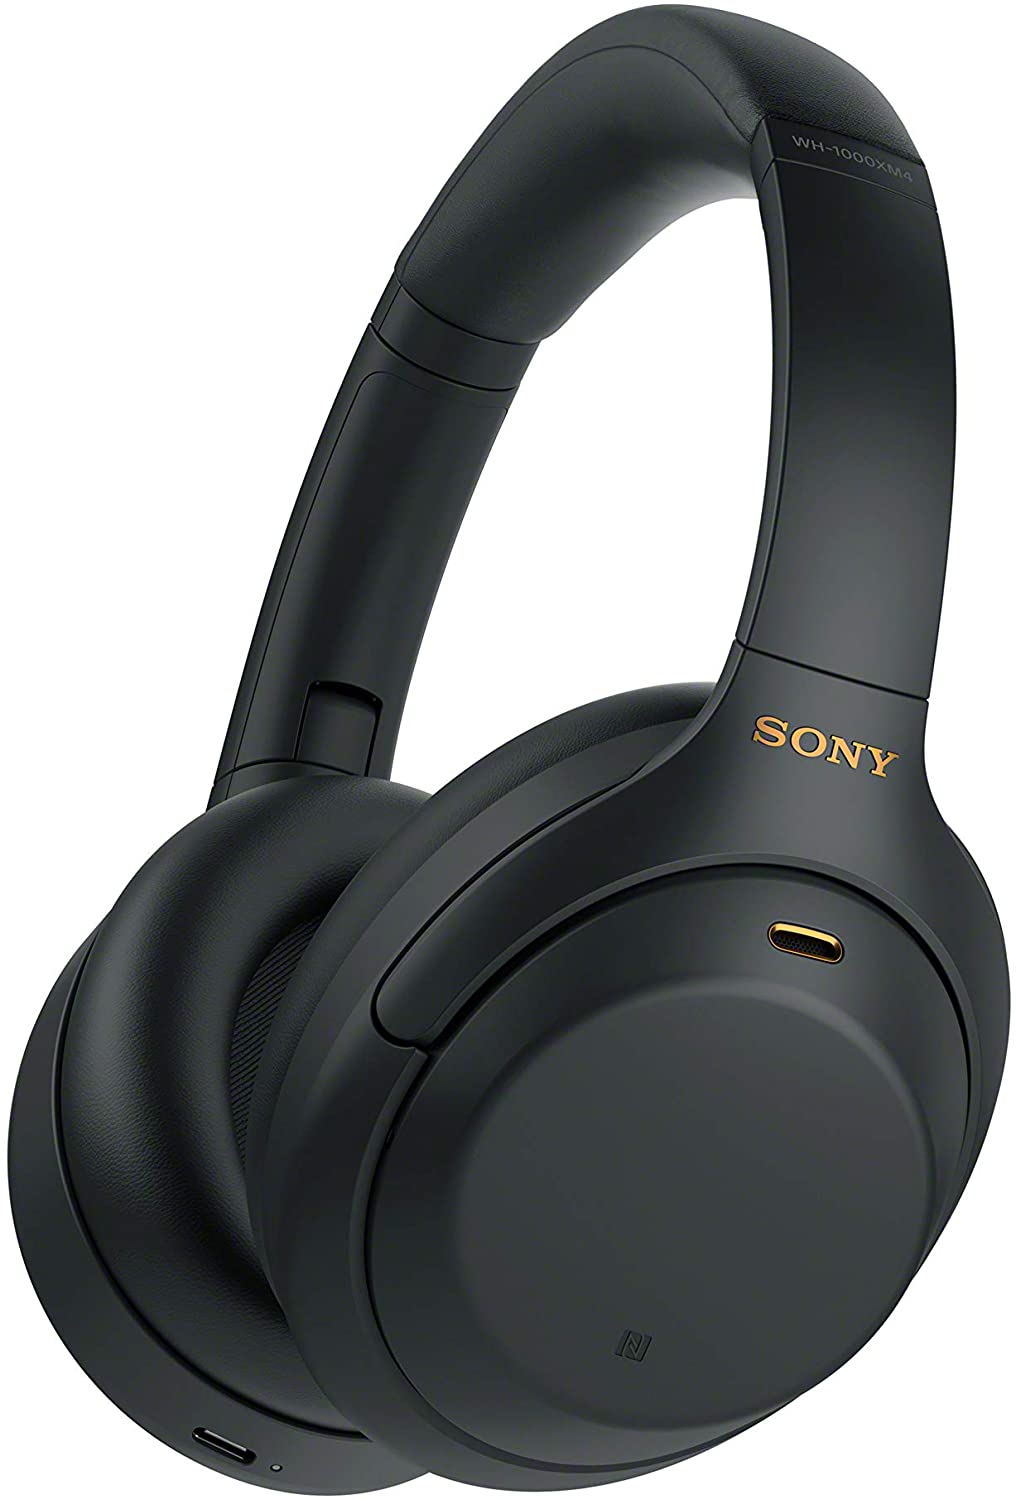 Sony WH-1000XM4 Wireless Noise-Cancelling Over-the-Ear Headphones - Black (New)